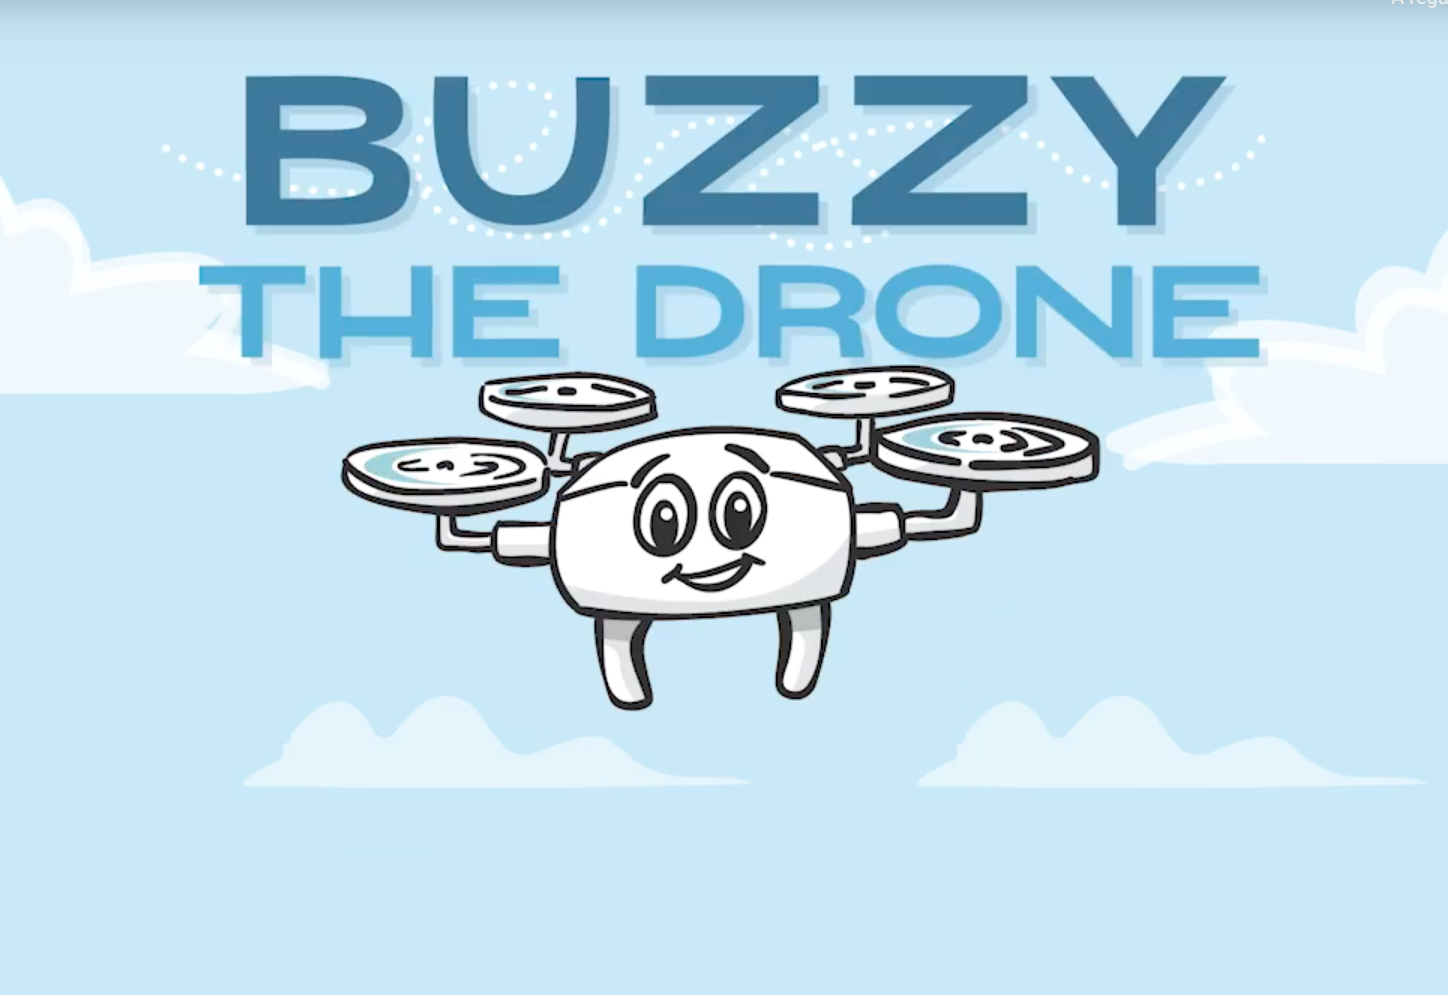 Buzzy the Drone